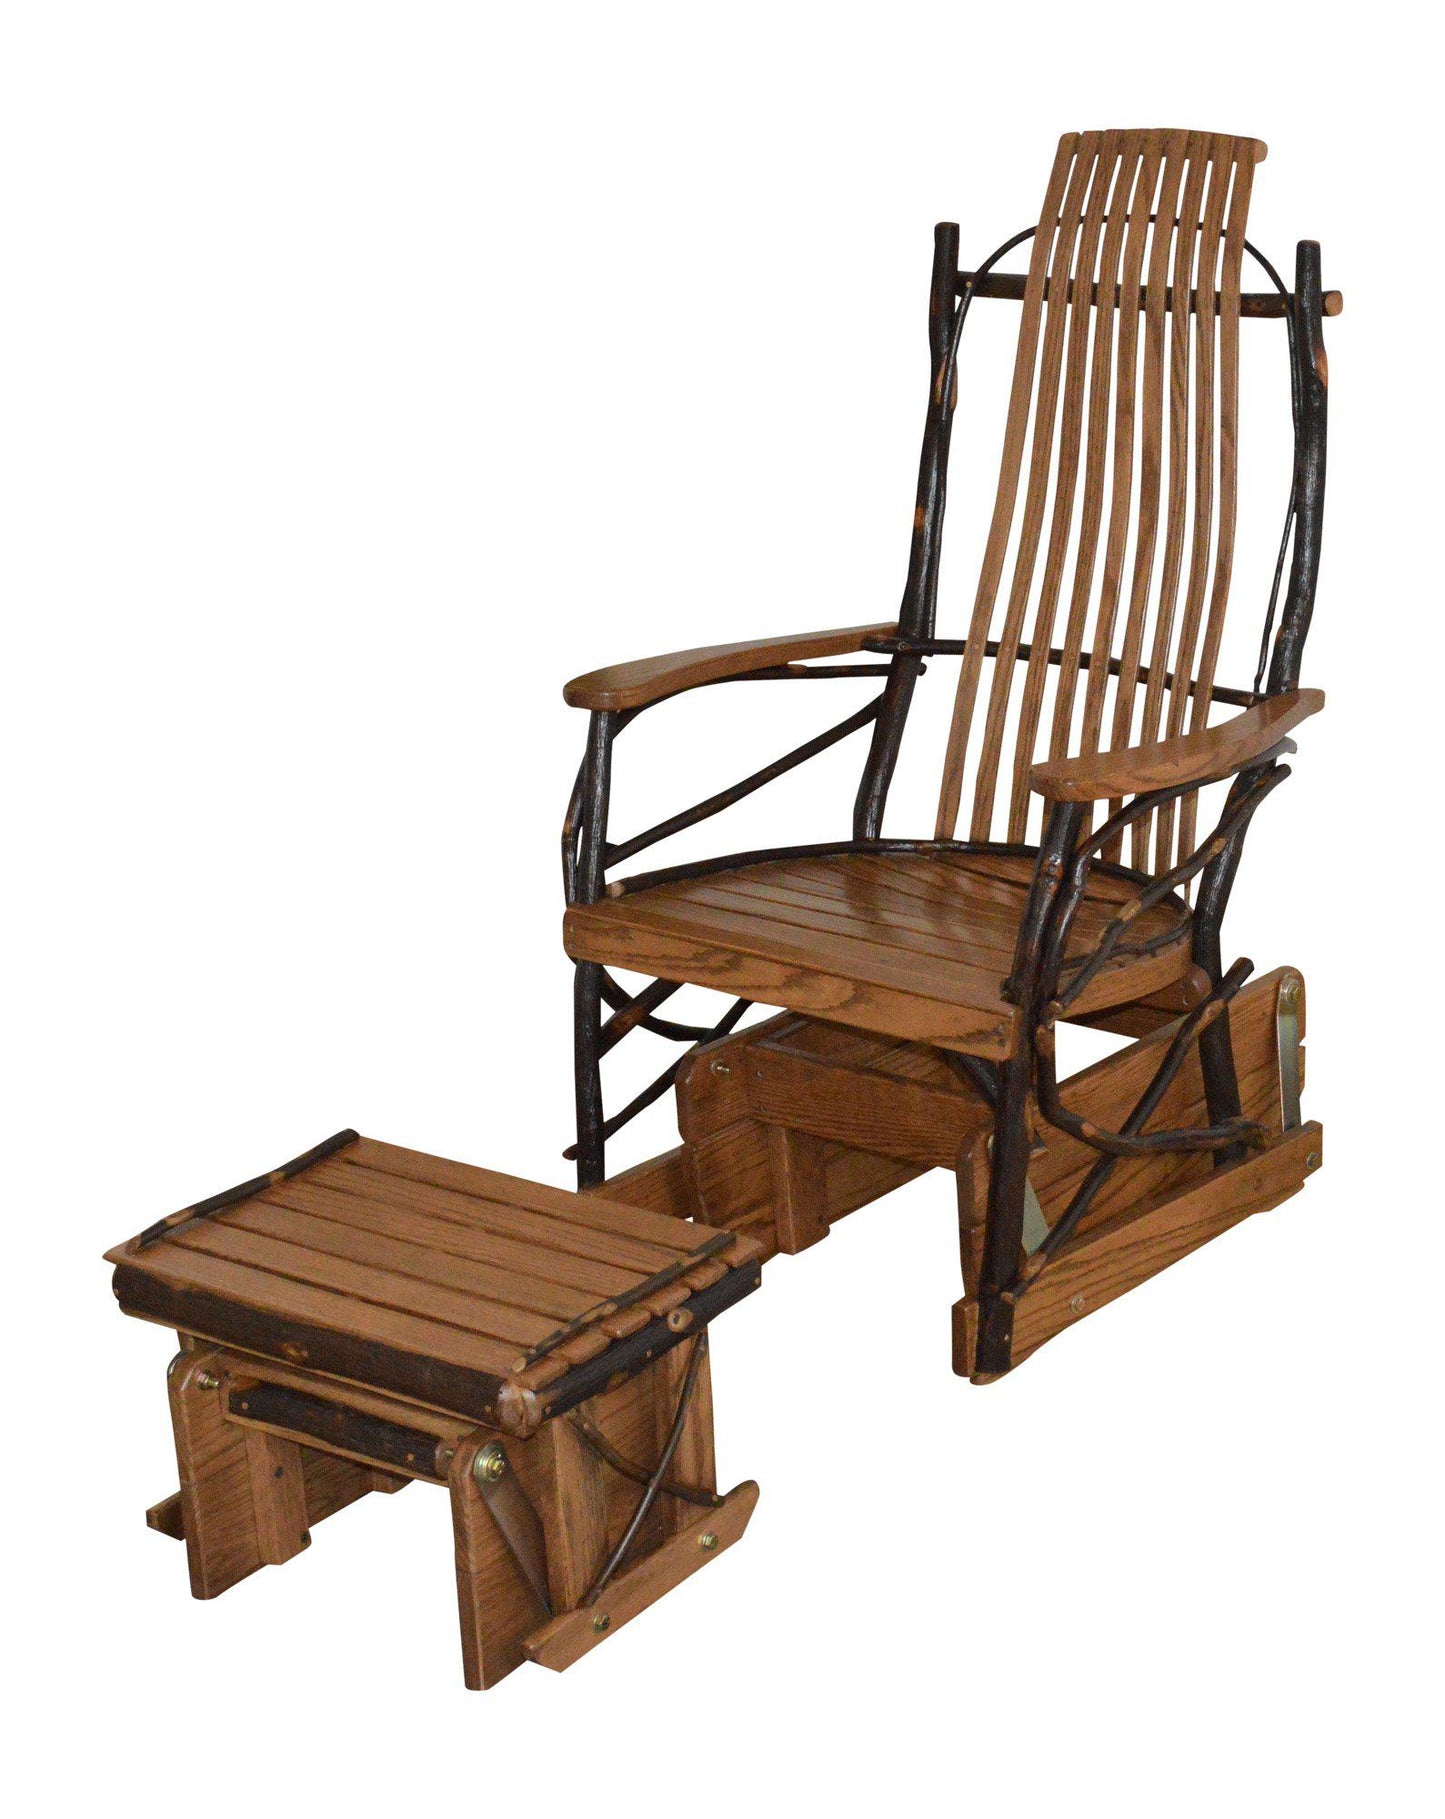 A&L Furniture Co. Amish Bentwood Hickory Glider Rocker with Gliding Ottoman Set - LEAD TIME TO SHIP 4 WEEKS OR LESS